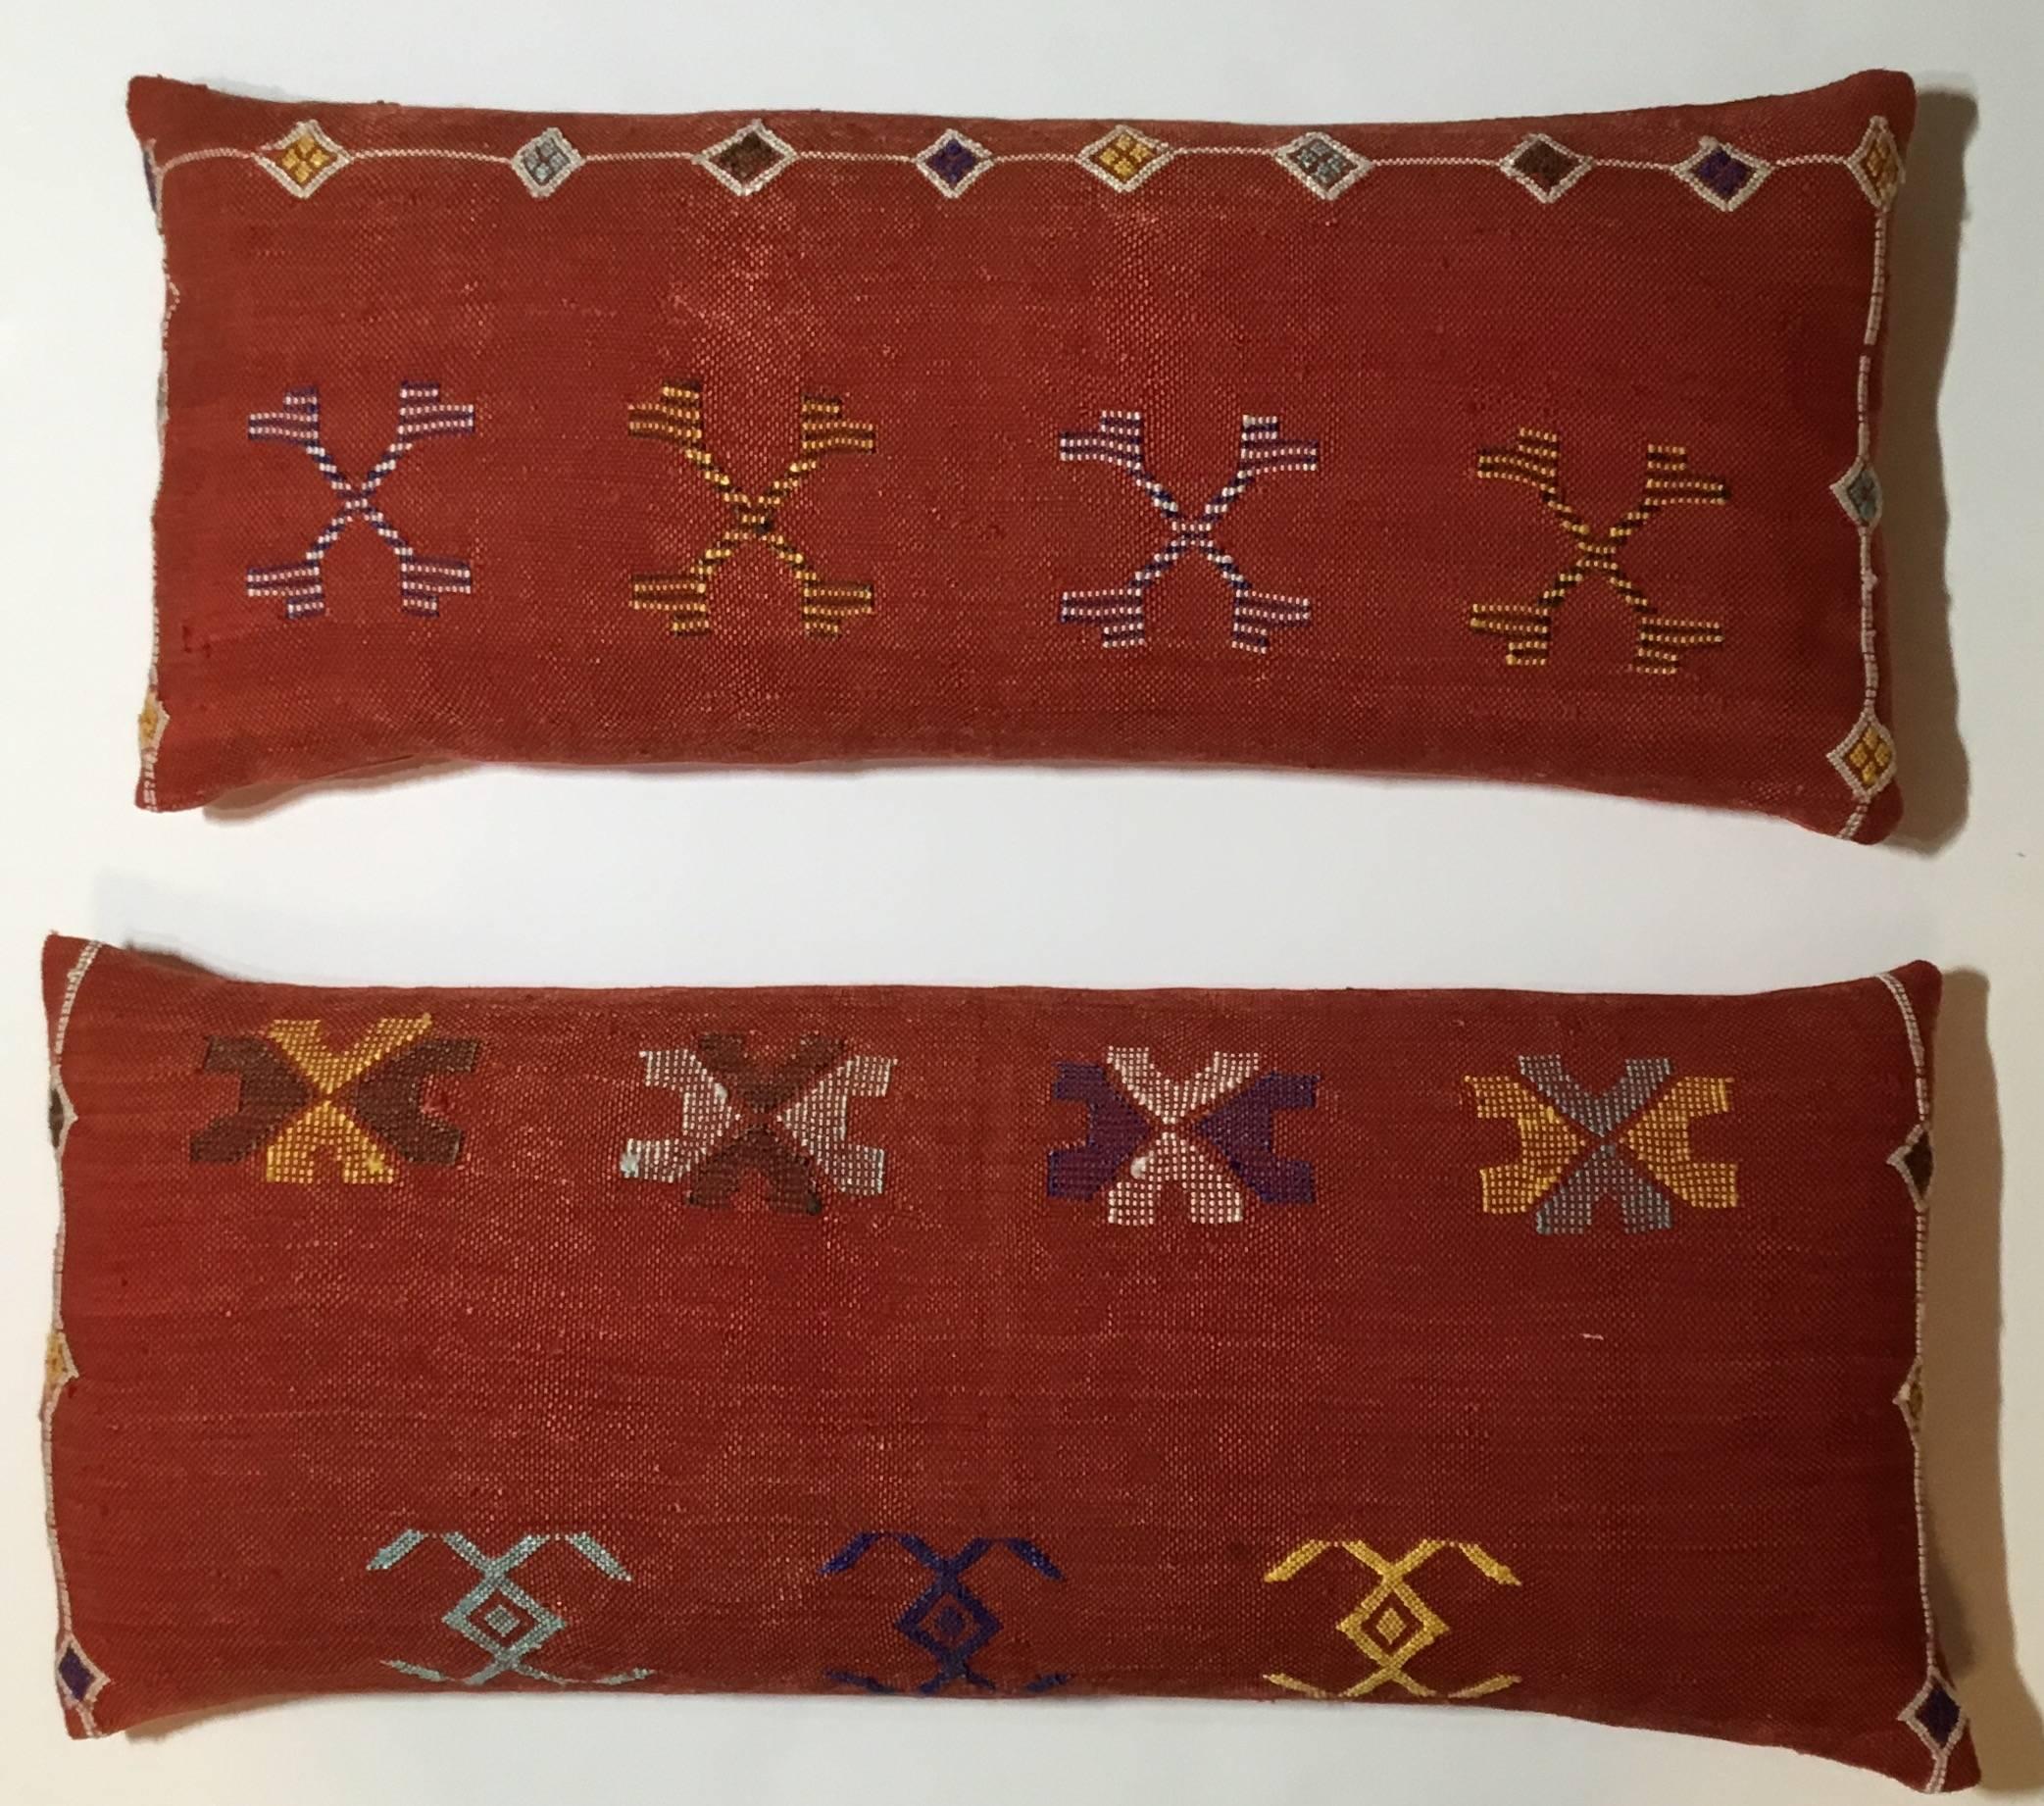 Beautiful pair of pillows made o of handwoven flat-weave Kilim rug fregment.
With colorful geometric motifs on a red -salmon color background.
Silk backing, Frash down and feather inserts.
Measures: Size one 11" x 27"
Size two 12"